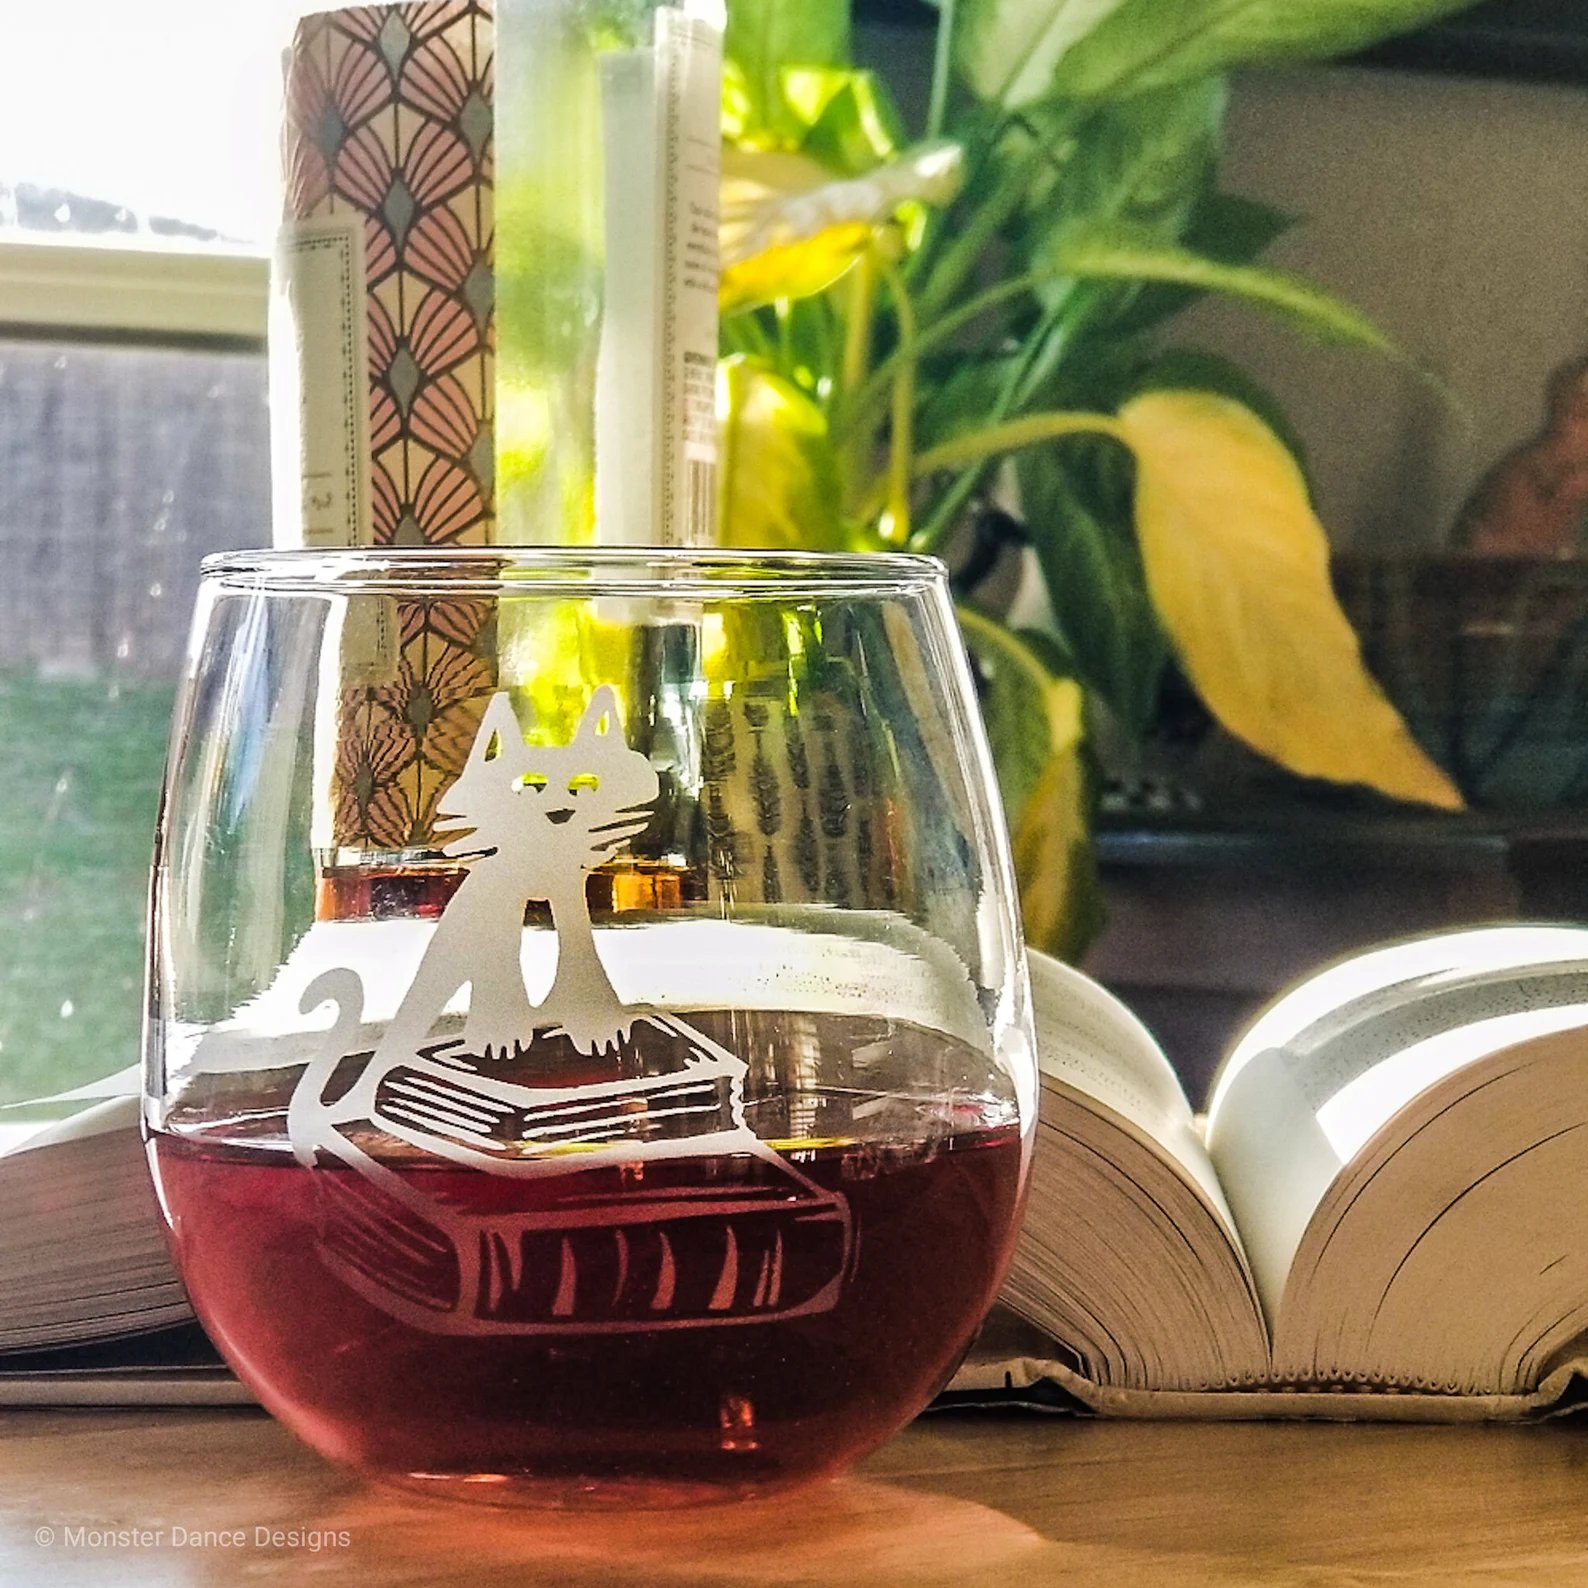 Image of a stemless wine glass with an image of a cat on a stack of books.